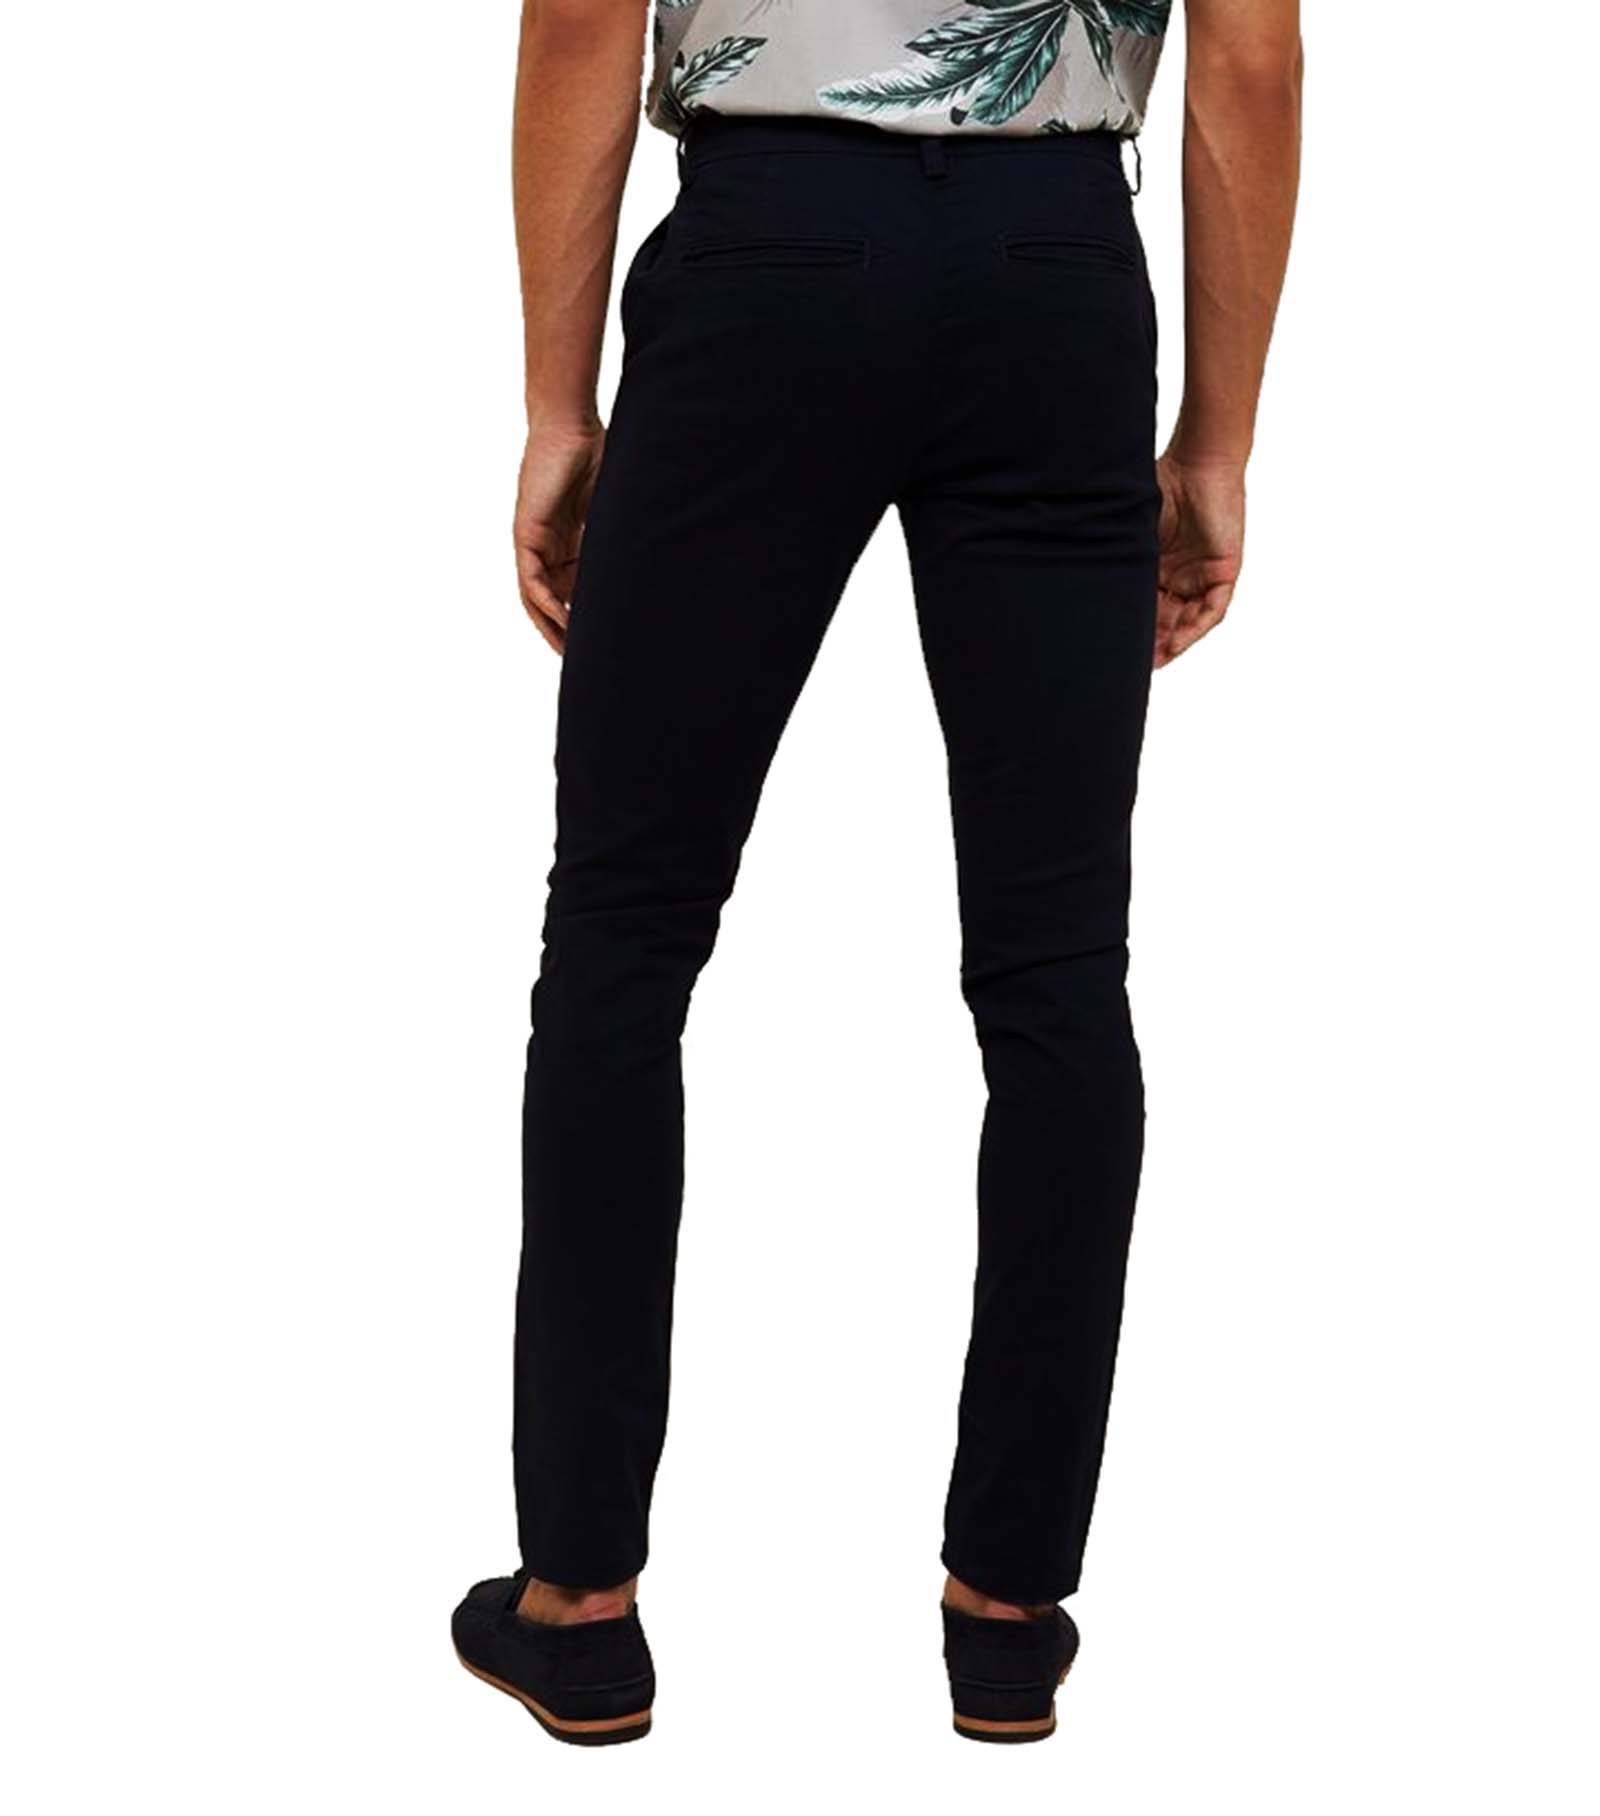 MENS BLACK SKINNY FIT CHINOS SMART CASUAL TROUSERS STRETCH JEANS PANTS ...